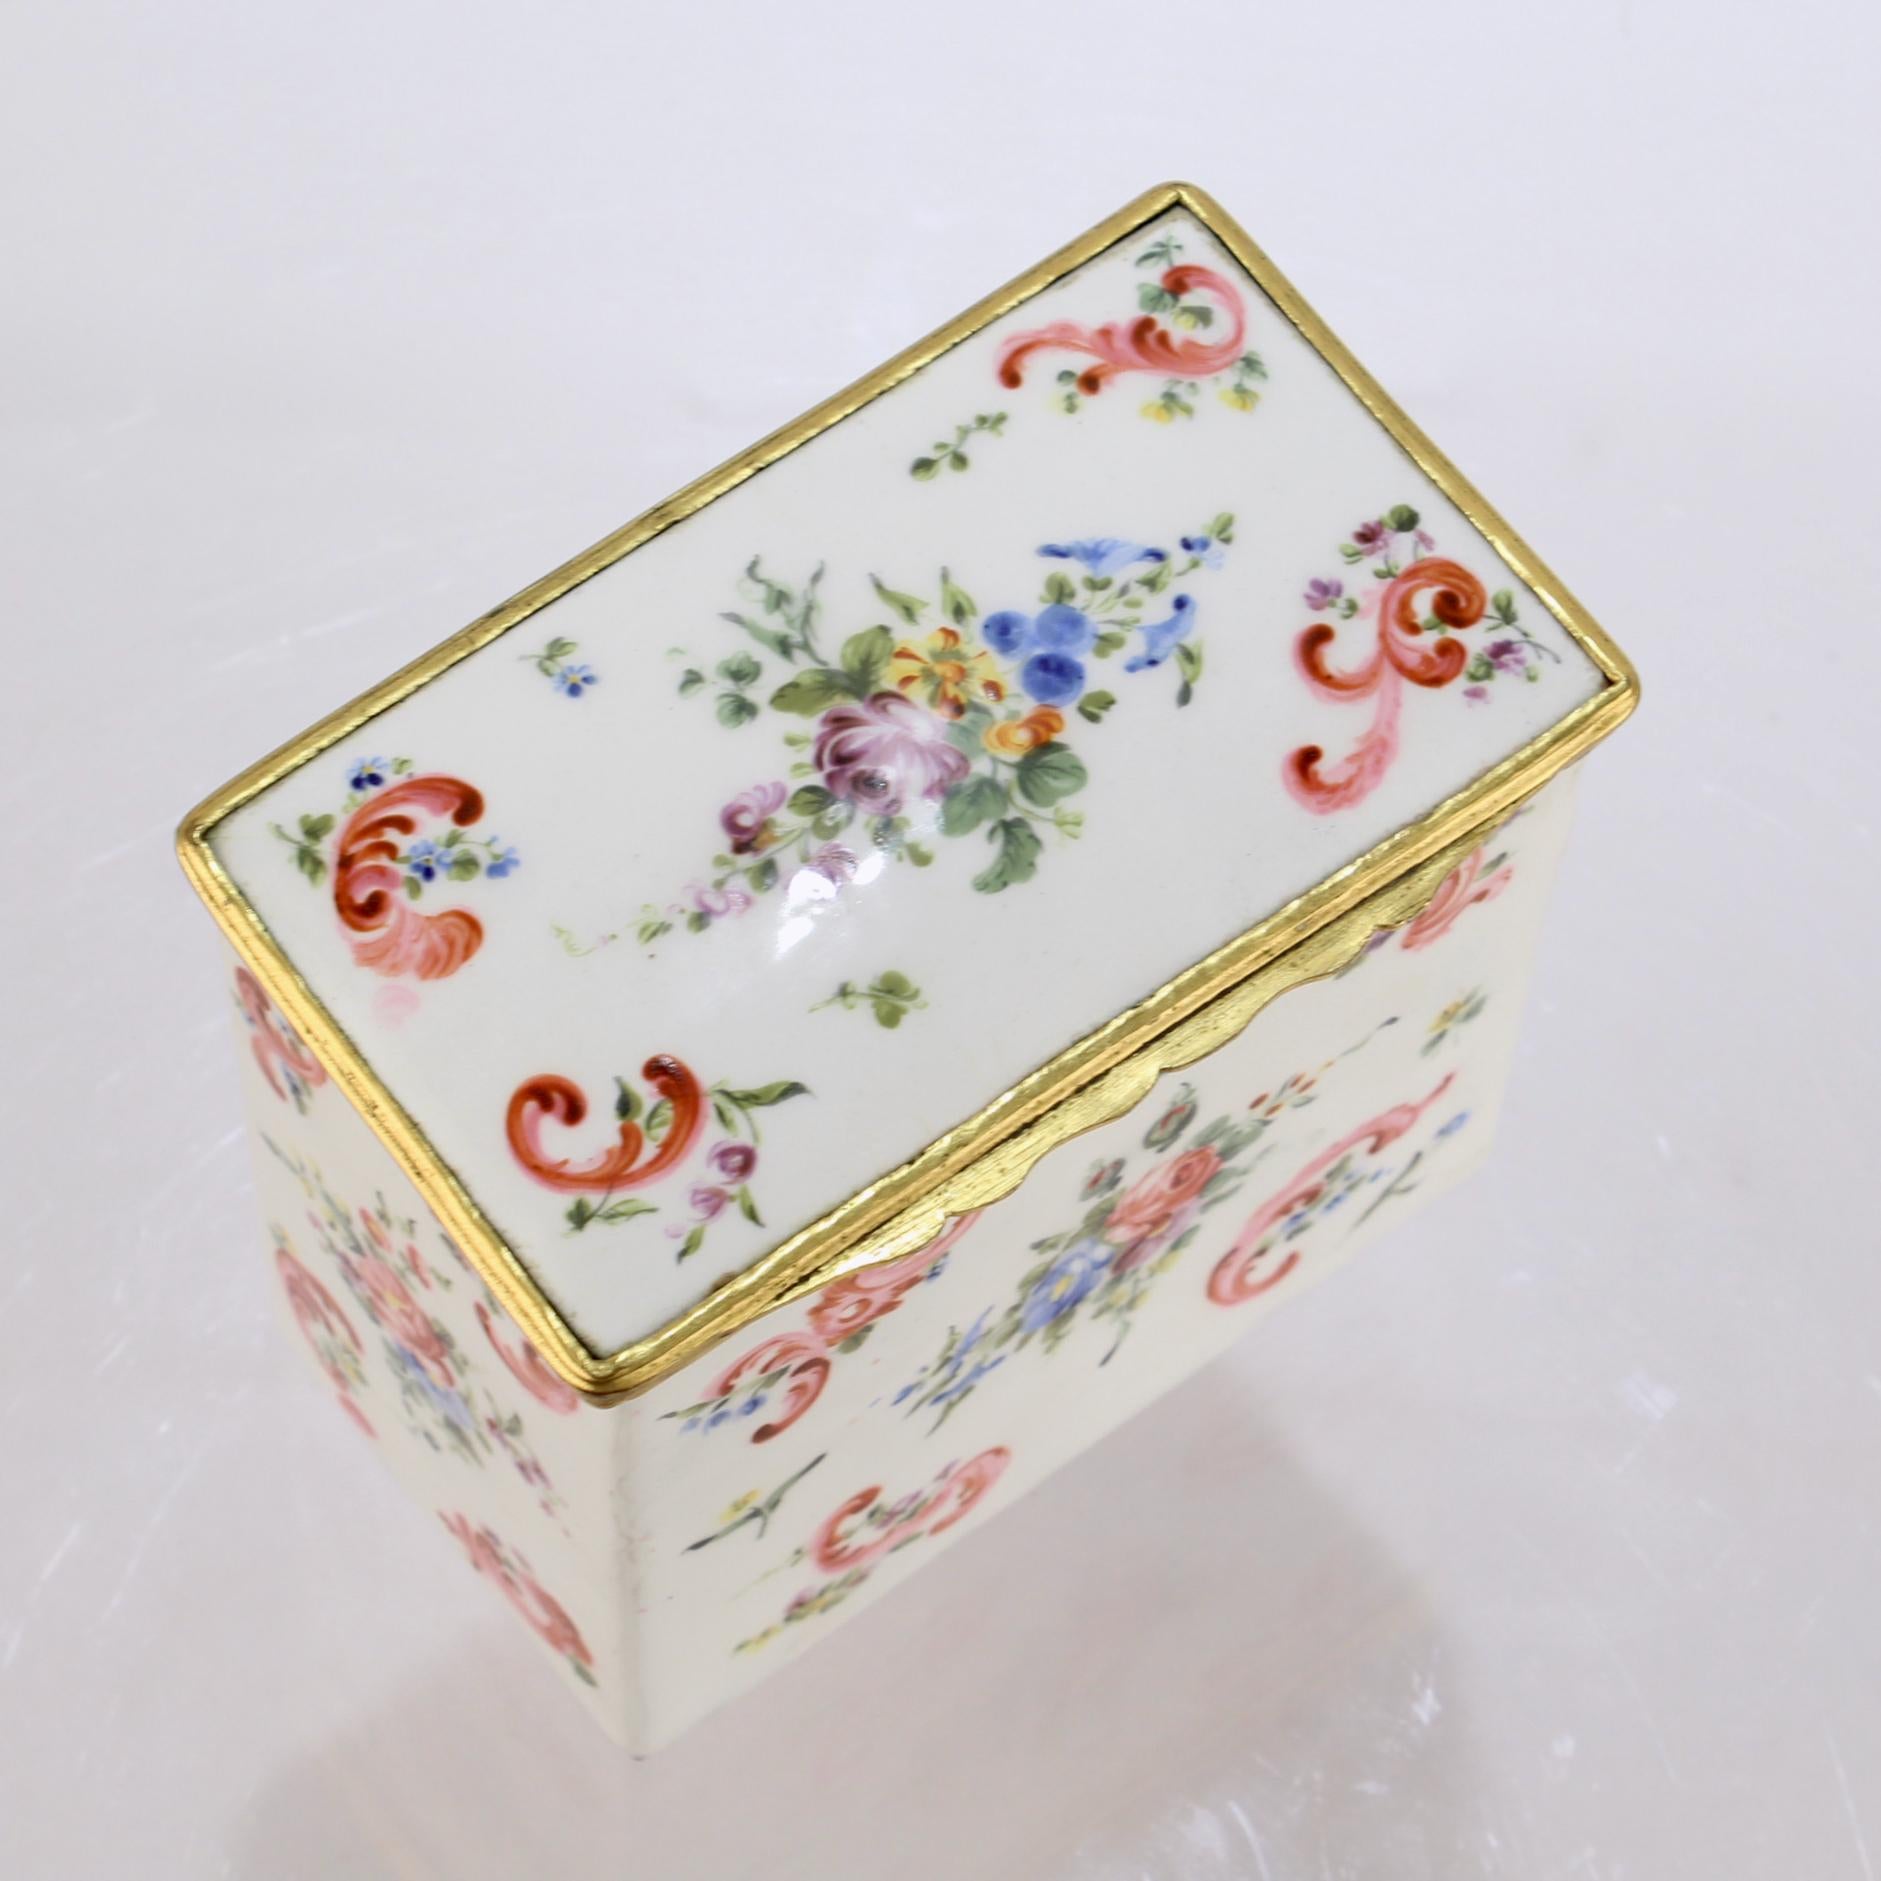 Antique 18c/19c English or French Enamel Bronze Mounted Tea Caddy Box For Sale 3